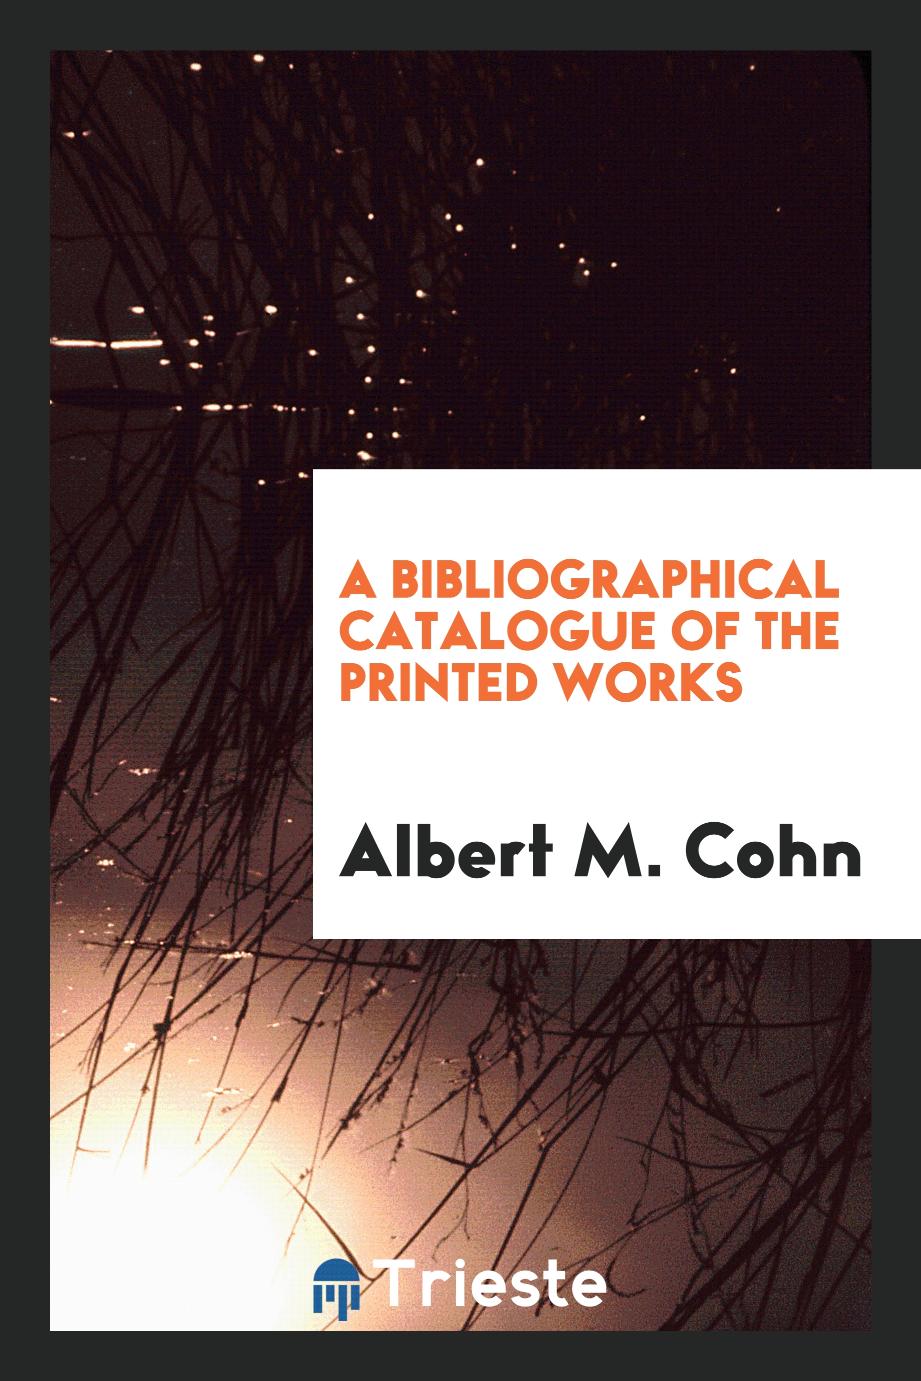 A bibliographical catalogue of the printed works